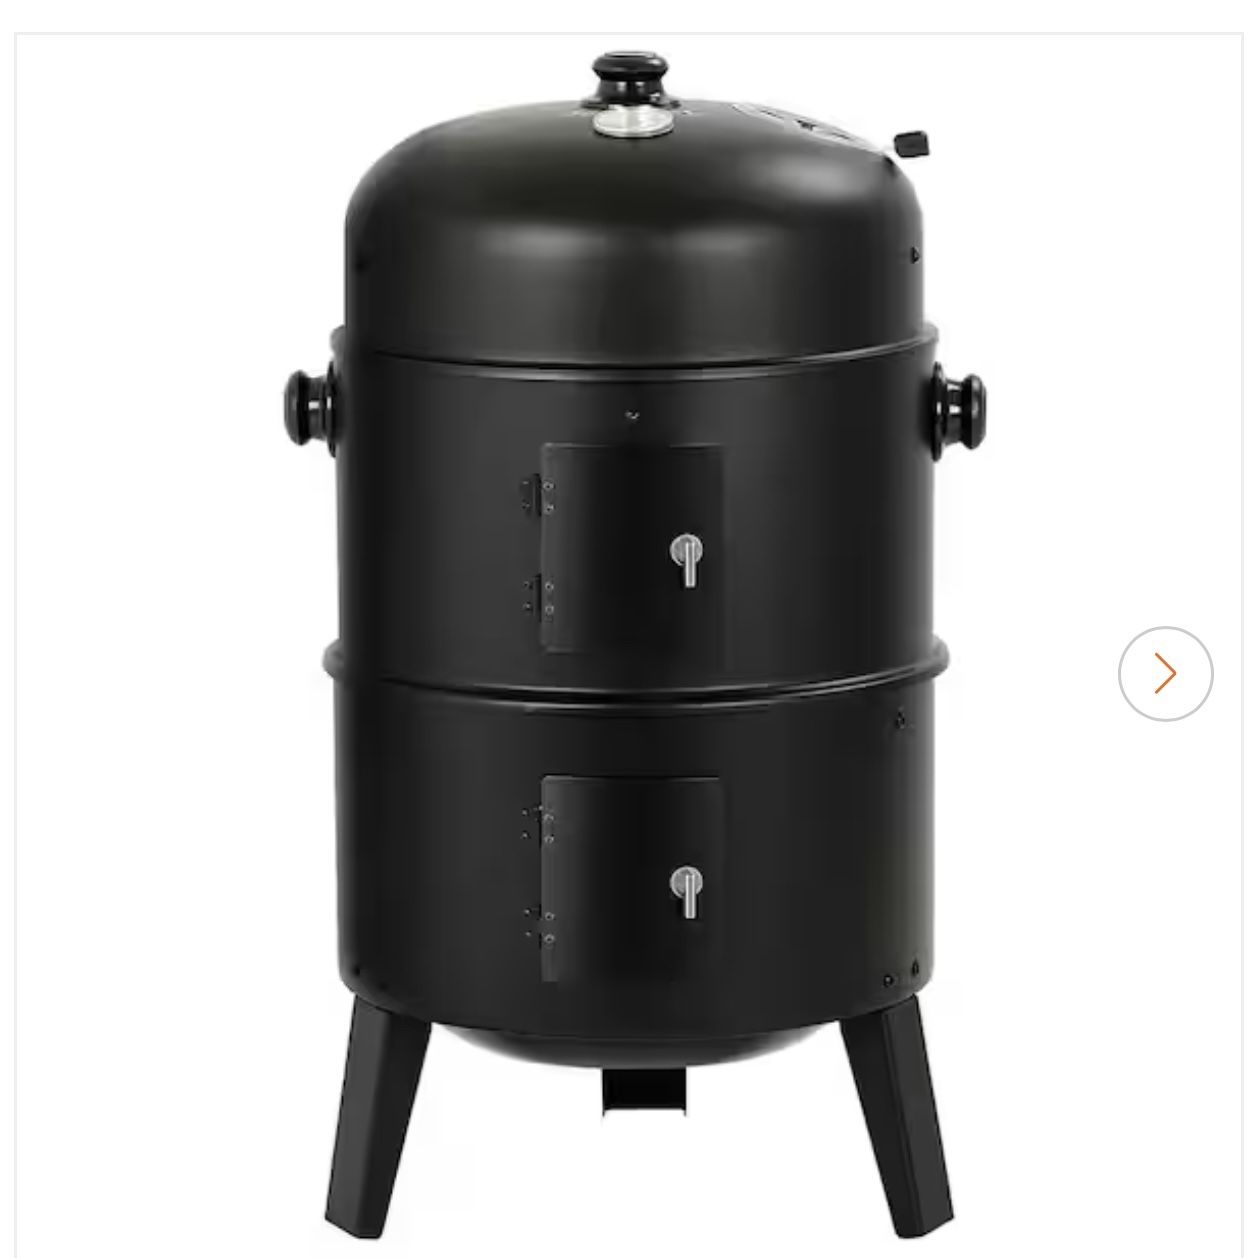 Vertical 16 in. Steel Charcoal Smoker, Heavy-Duty Round BBQ Grill for Outdoor Cooking in Black